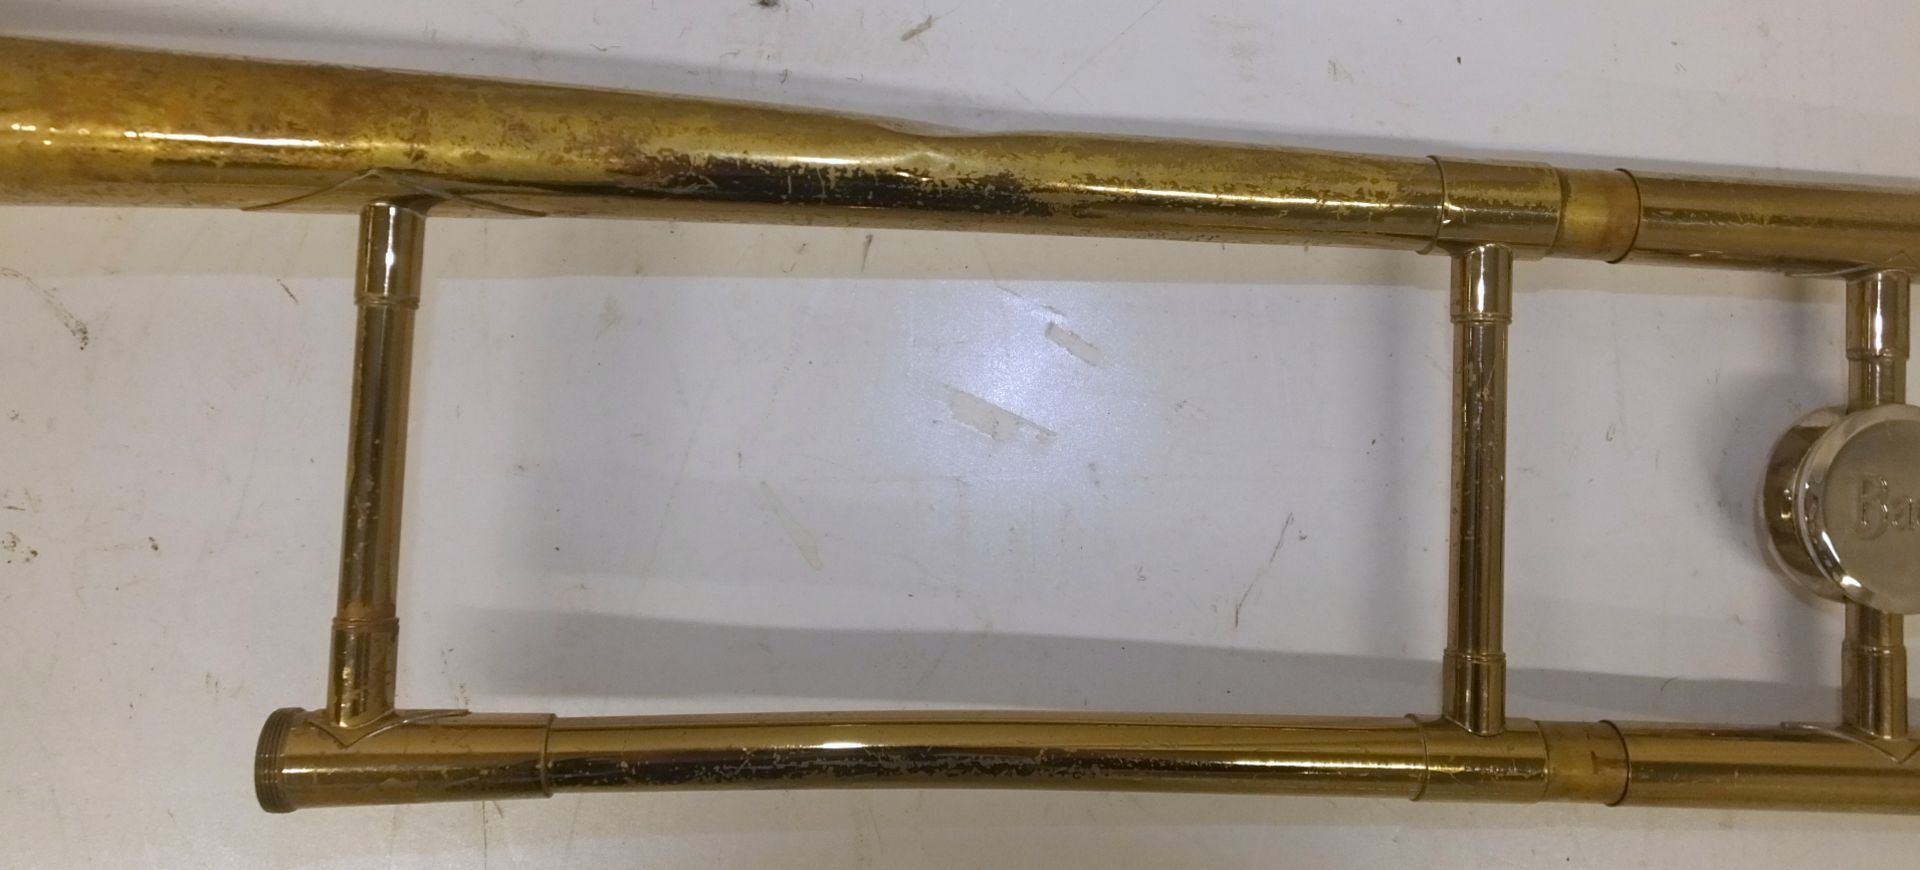 Bach Trombone in case - Serial Number - 89521 - Image 7 of 15